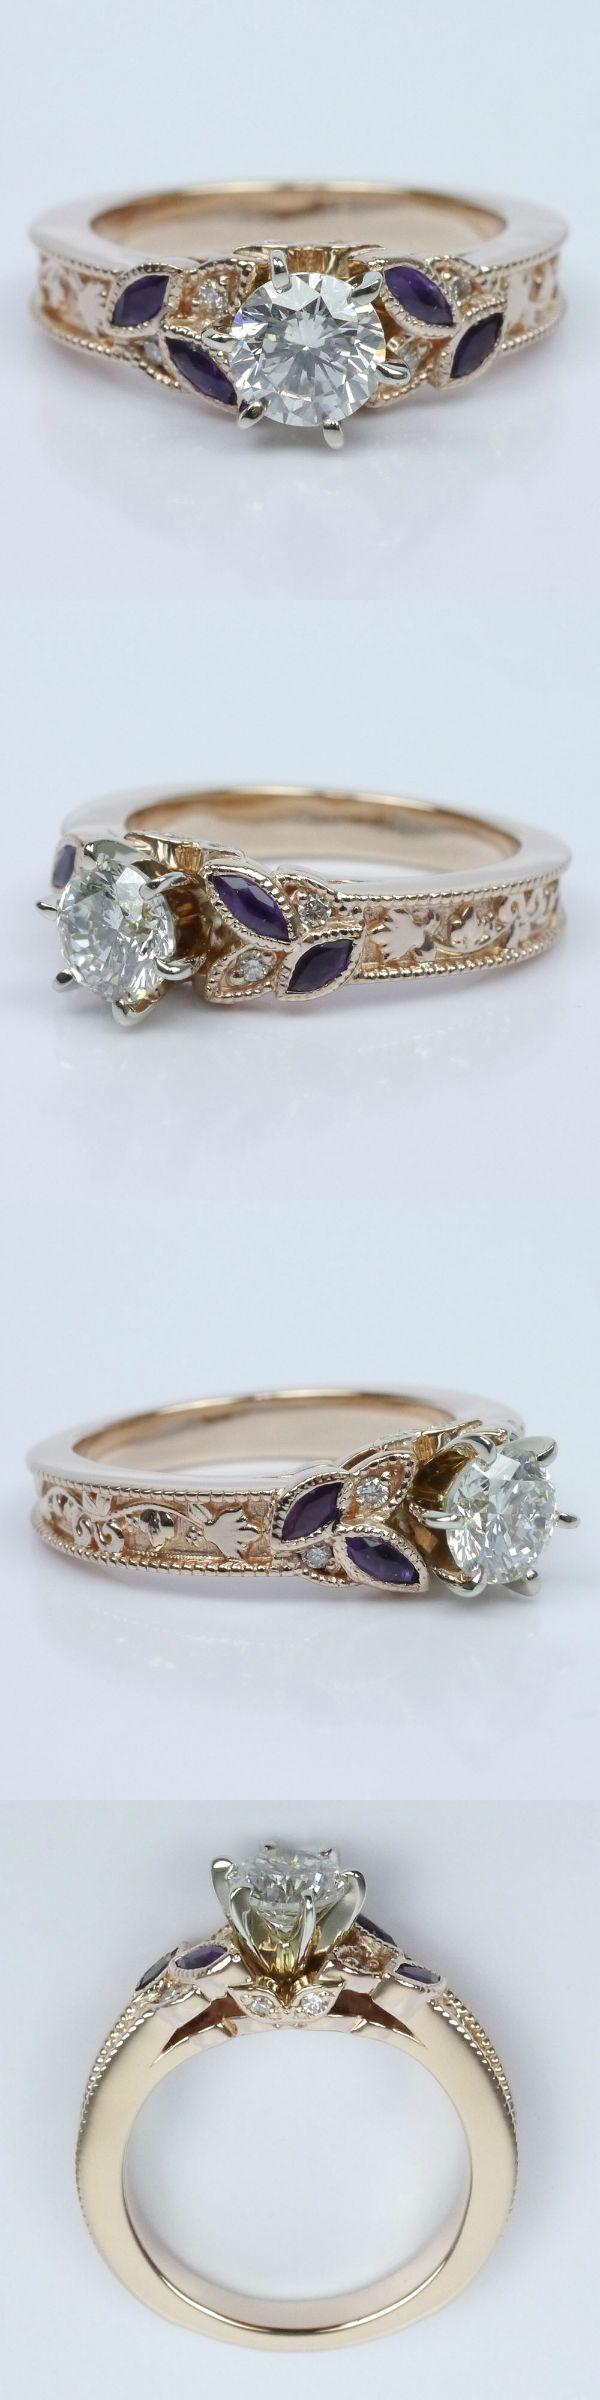 Mariage - Vintage Diamond And Amethyst Floral Engagement Ring